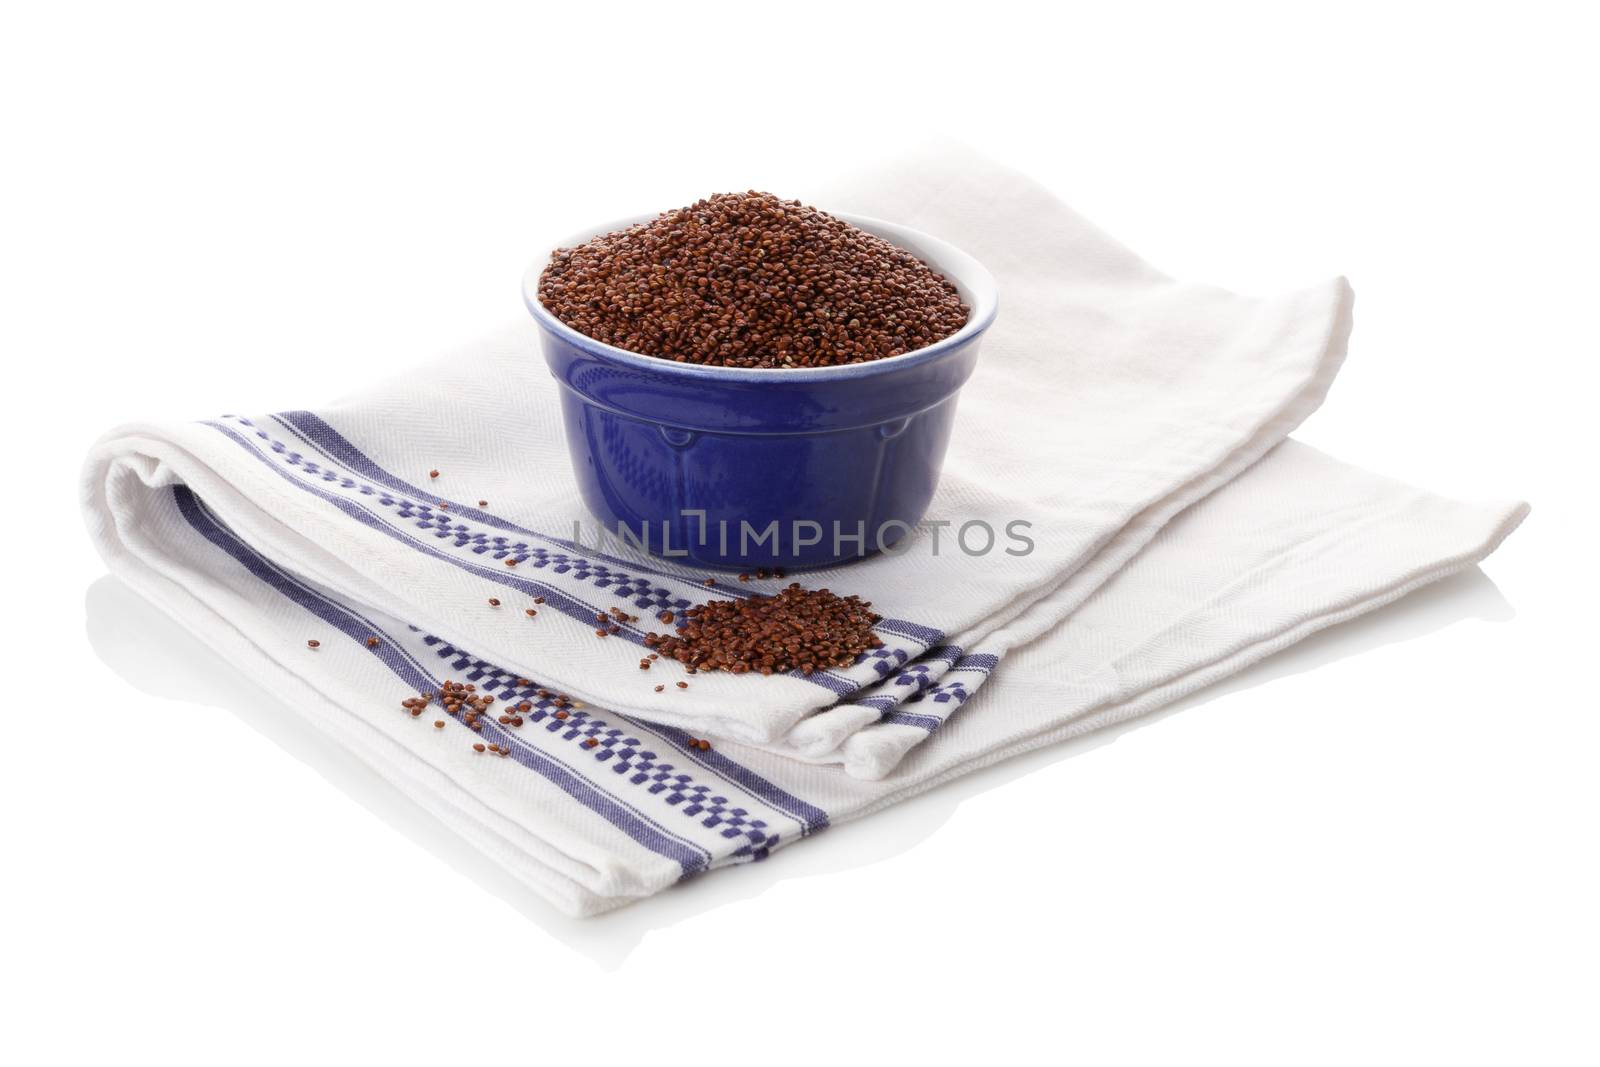 Quinoa seeds in bowl on white background. Healthy eating, dietary supplement.